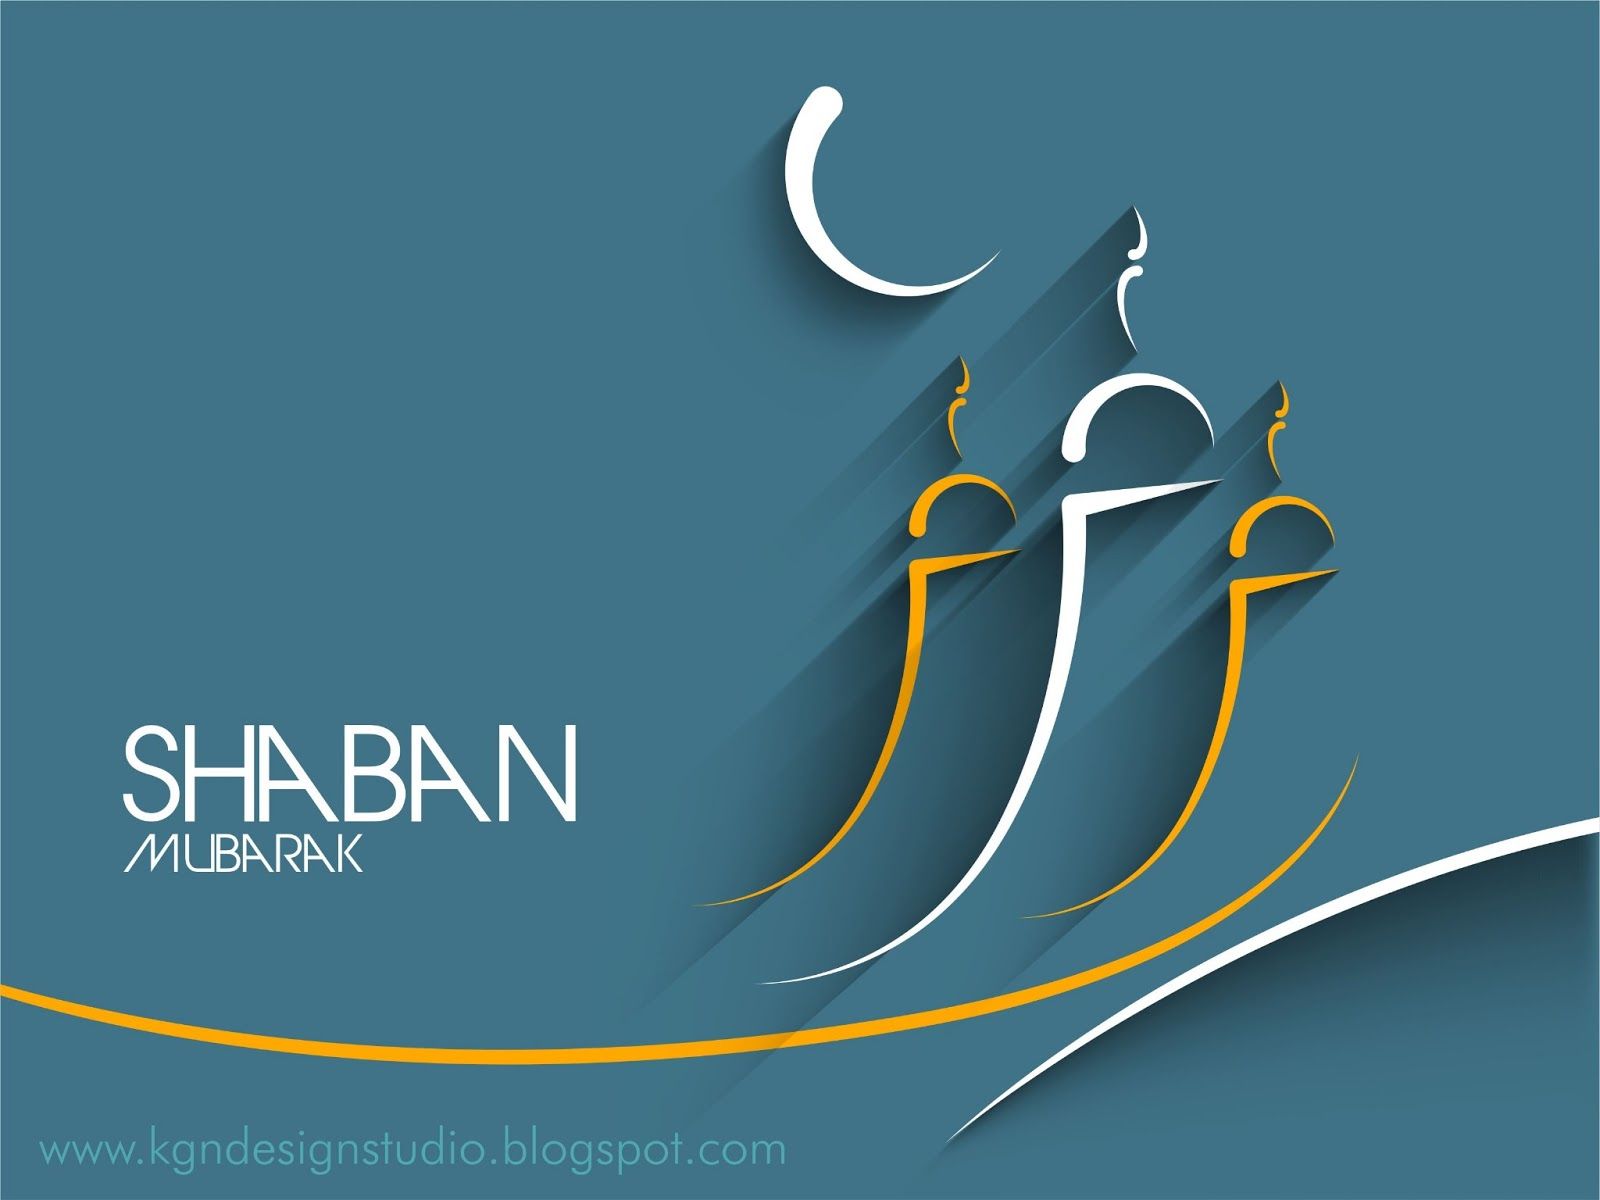 Praying For A Blessed Month Of Shaban Your All Wallpaper